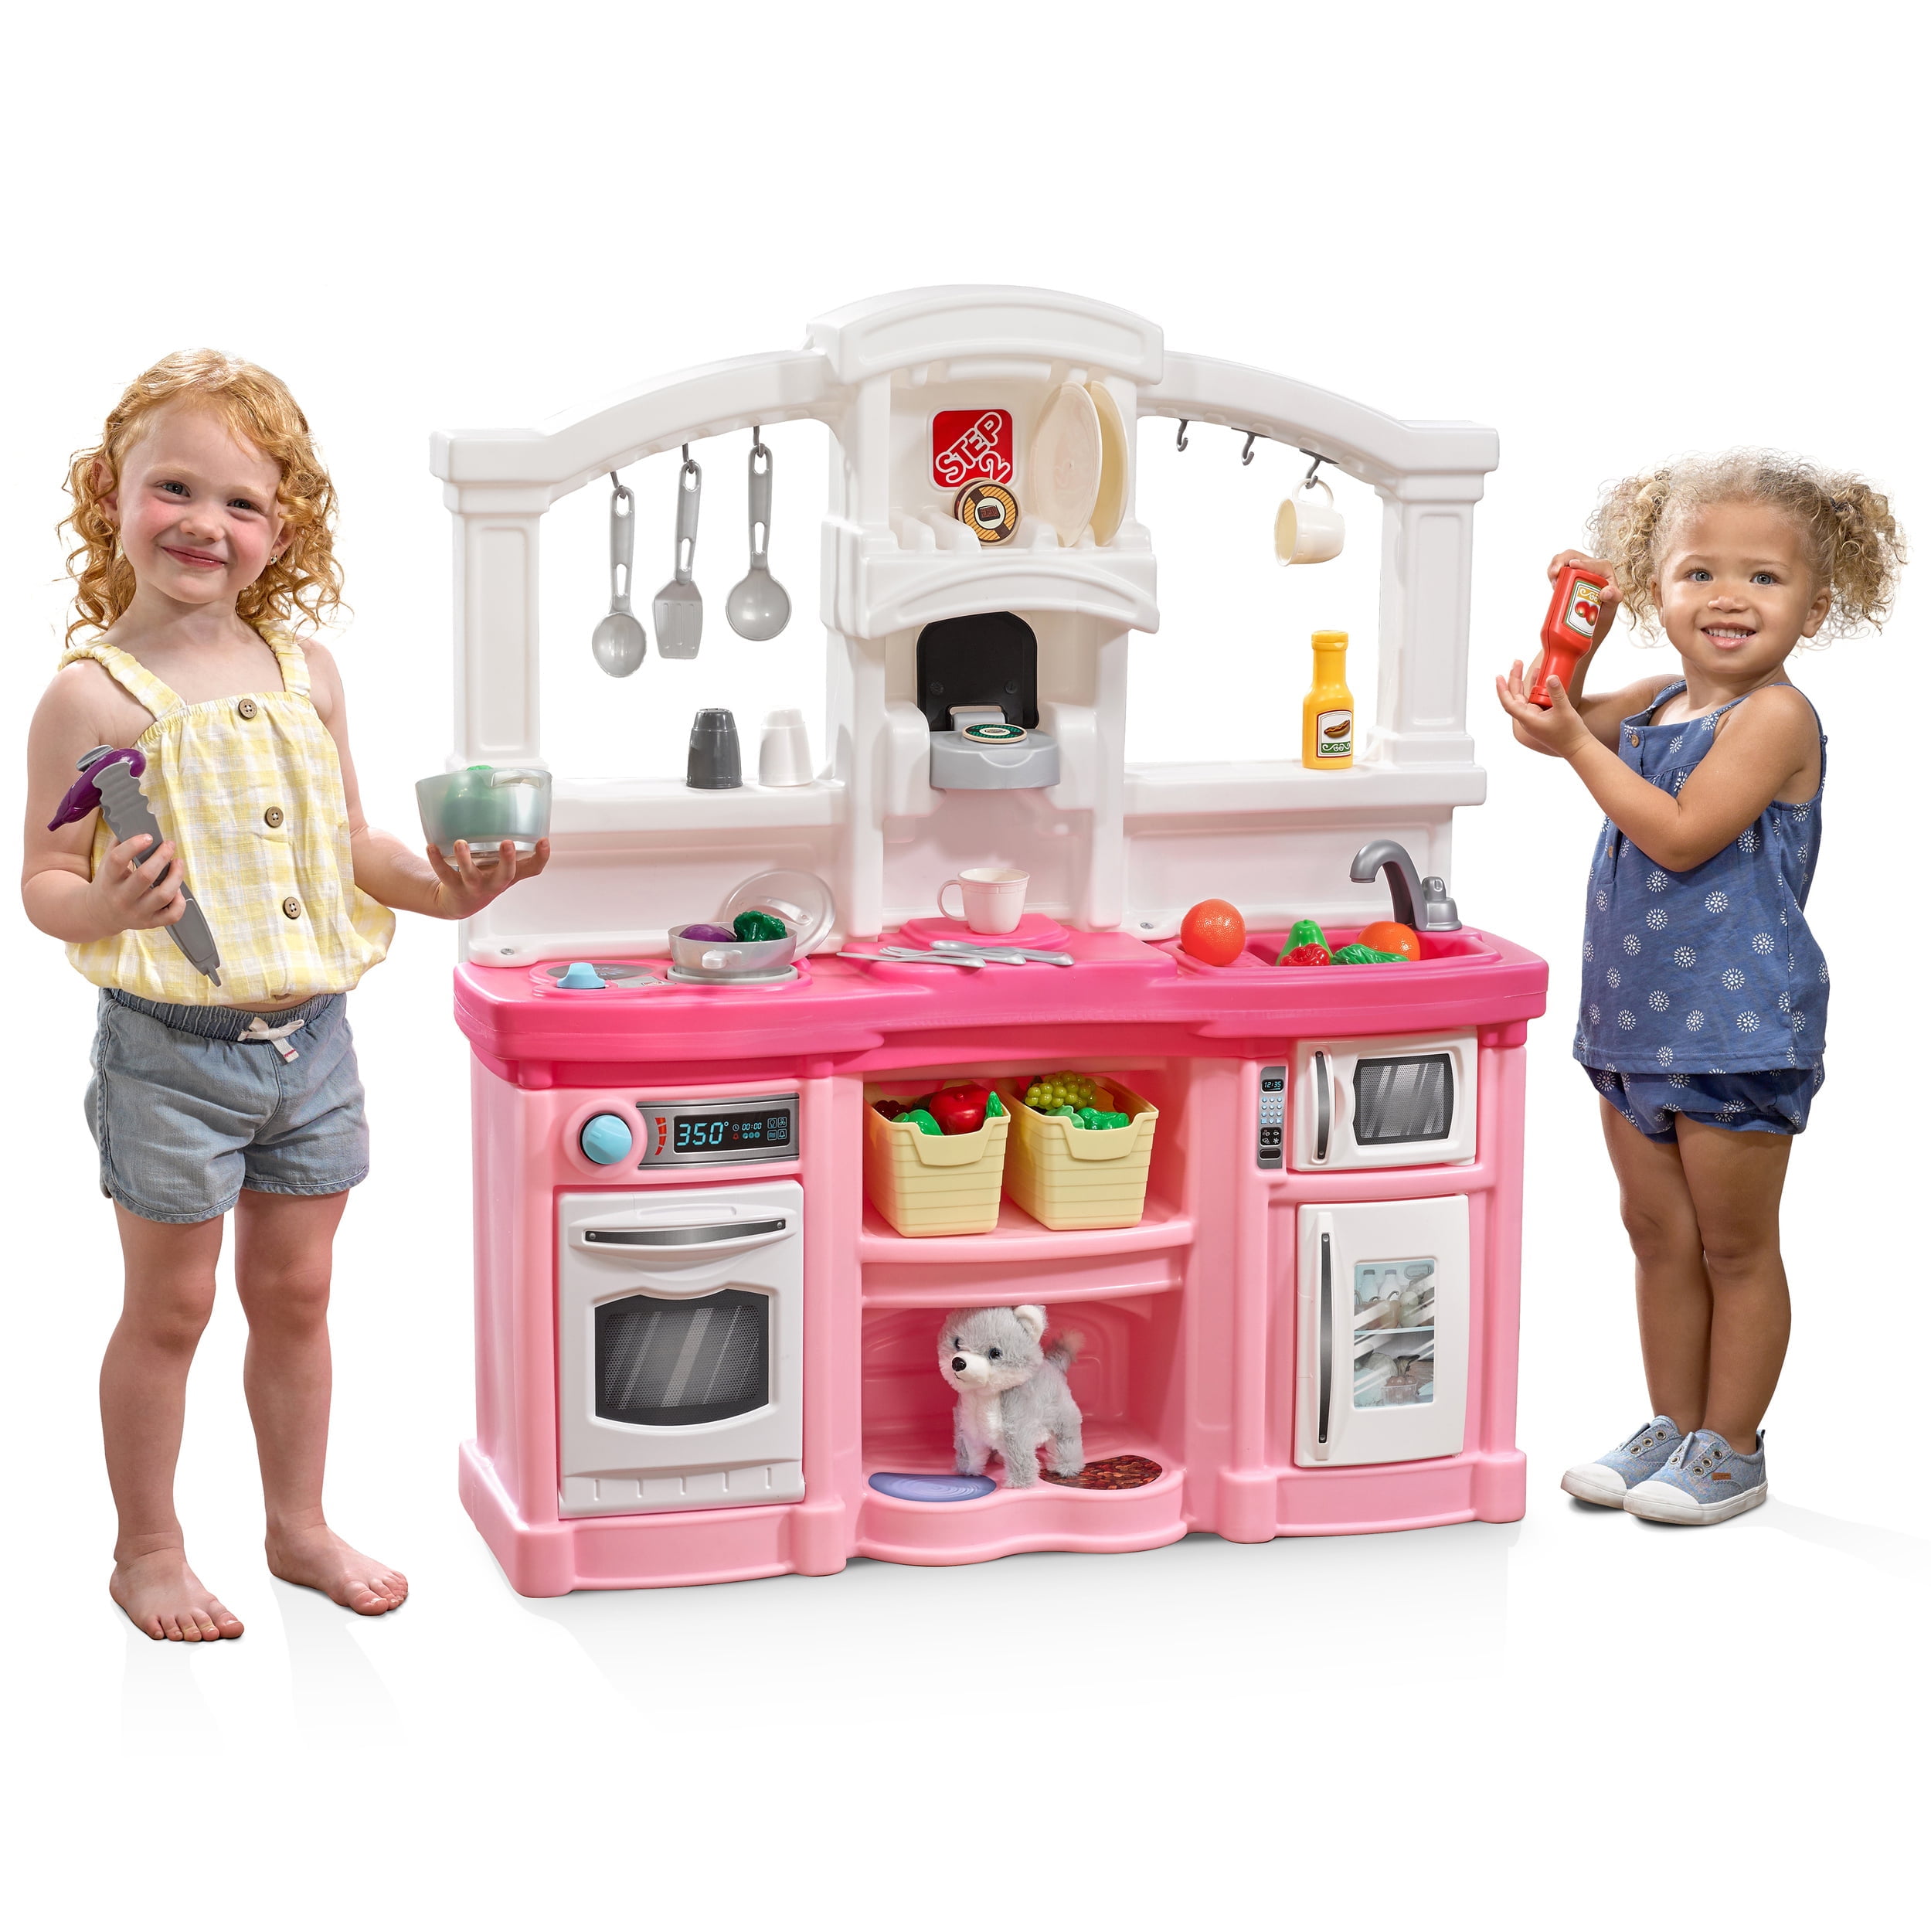 Step2 Fun with Friends Kids Kitchen, Indoor/Outdoor Play Kitchen Set,  Toddlers 2+ Years Old, 25 Piece Kitchen Toy Set, Easy to Assemble, Pink